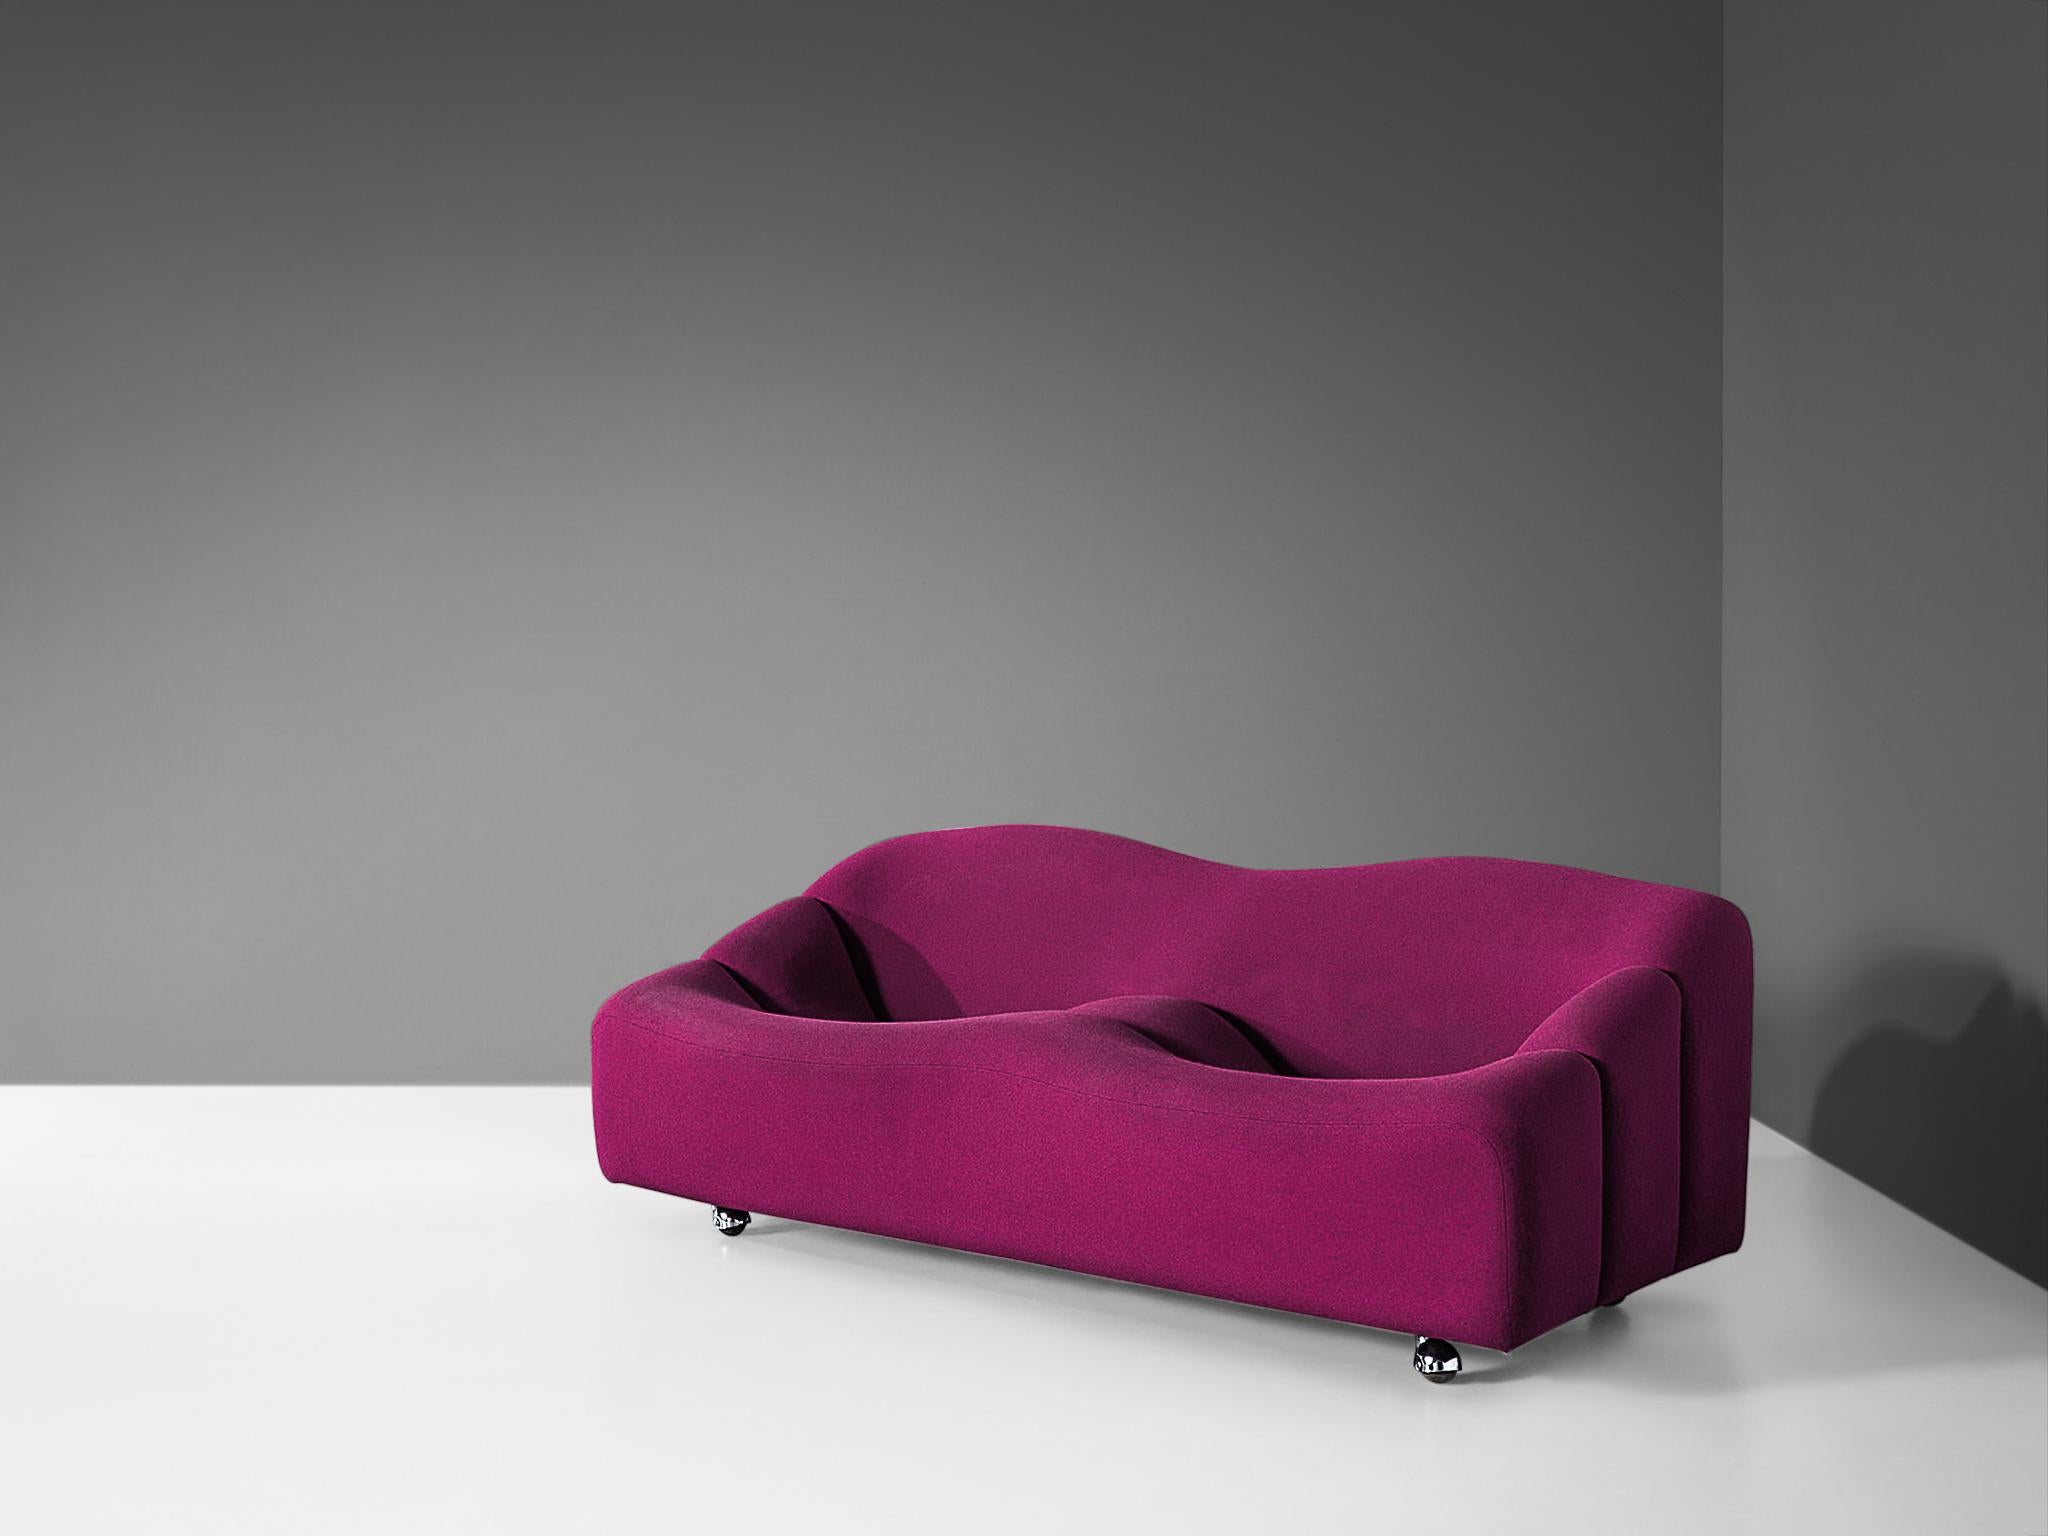 Pierre Paulin for Artifort, two-seat sofa from the ABCD series, fabric Kvadrat Hallingdal 65 - Color 0563, wood, metal, The Netherlands, design 1968

Beautifully curved and iconic two seat sofa by Pierre Paulin in a fuchsia colored upholstery. This